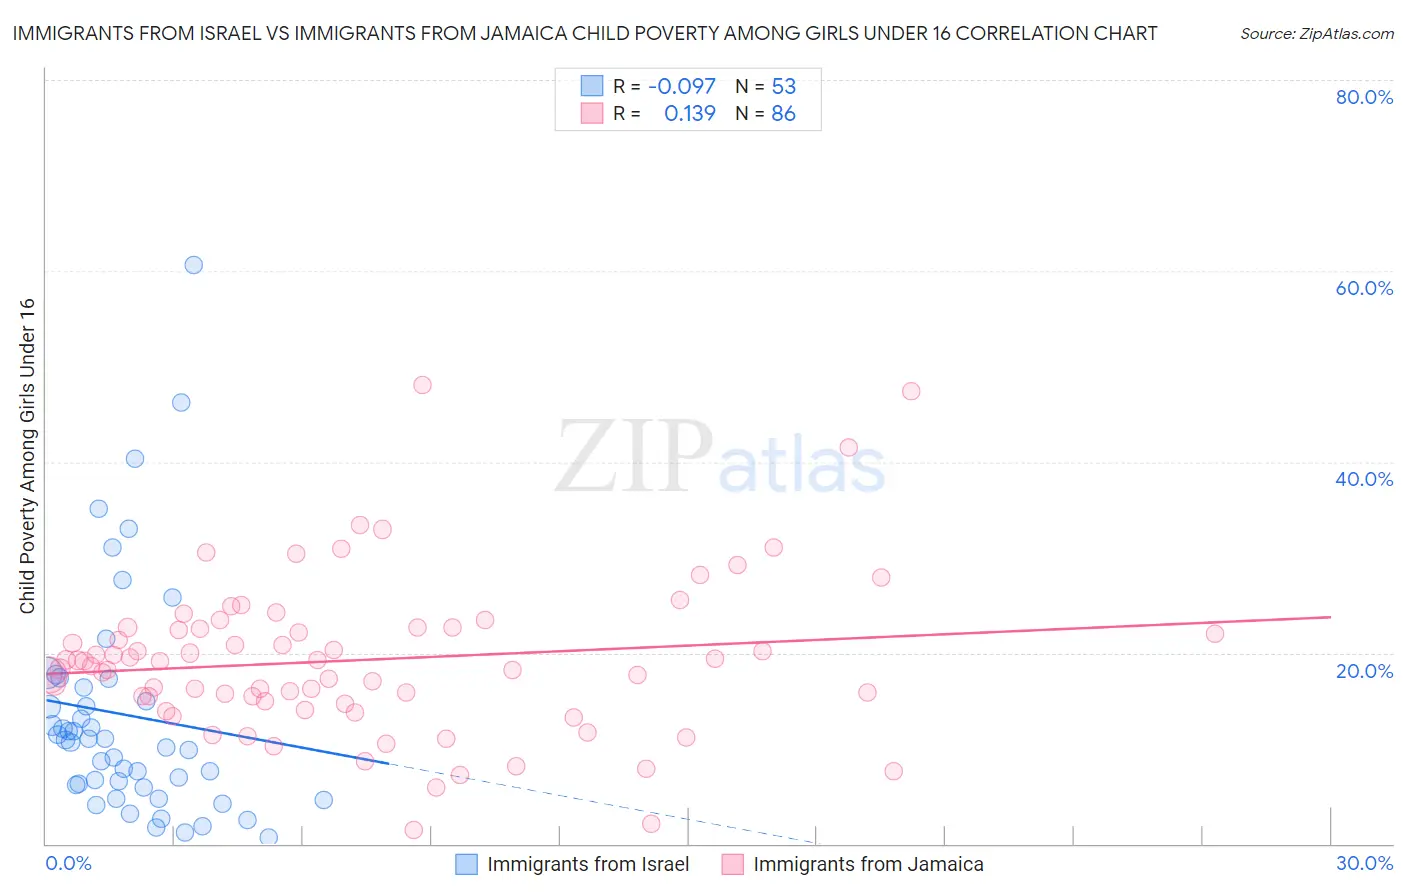 Immigrants from Israel vs Immigrants from Jamaica Child Poverty Among Girls Under 16